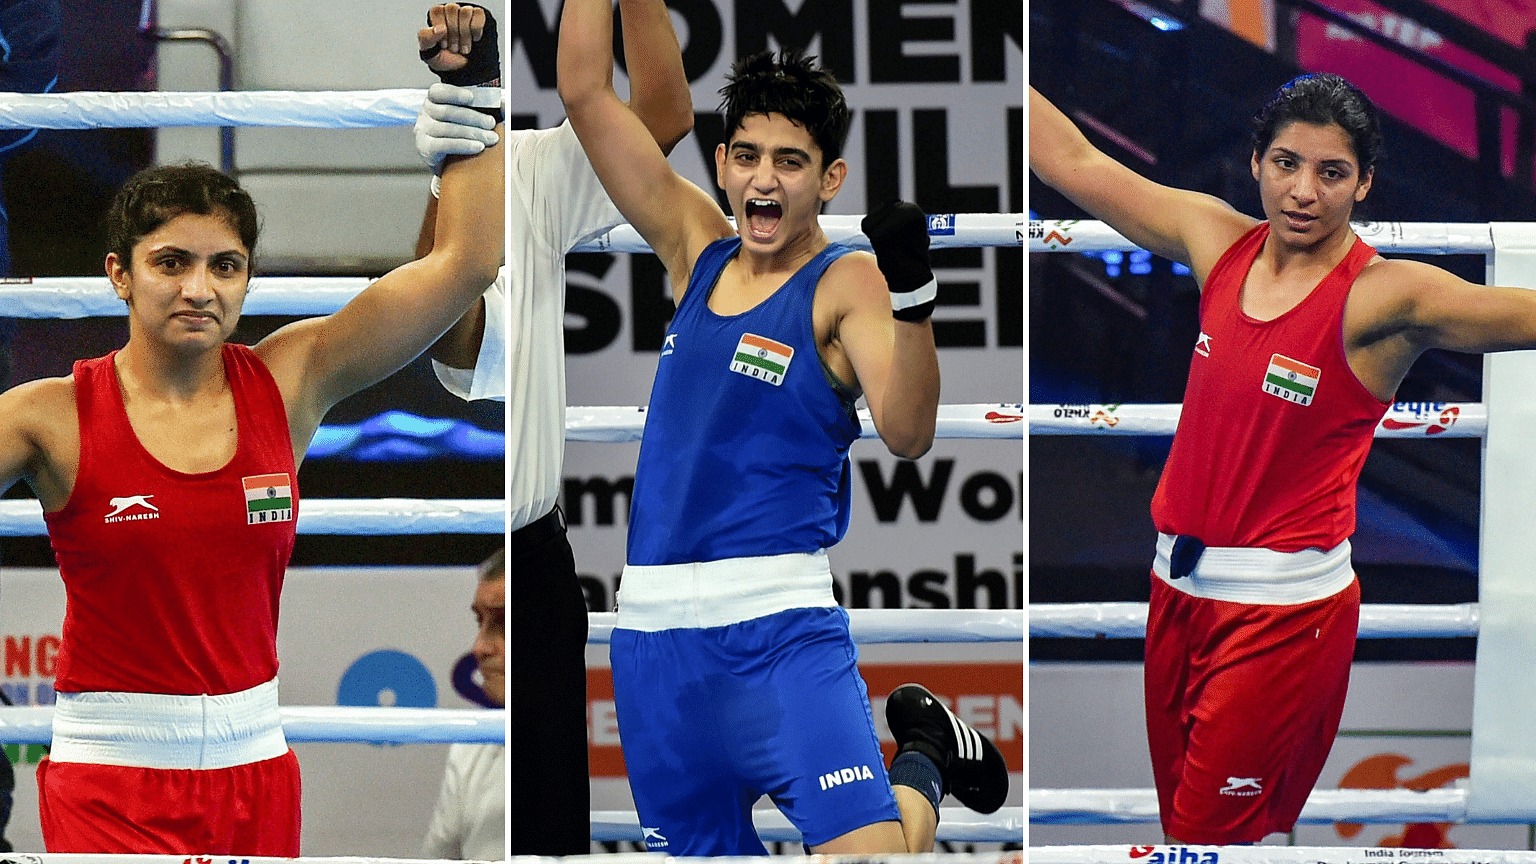 From left: Simranjit Kaur, Sonia Chahal &amp; Pinki Rani celebrate after winning their bout on Monday at the AIBA Women’s World Boxing Championships.